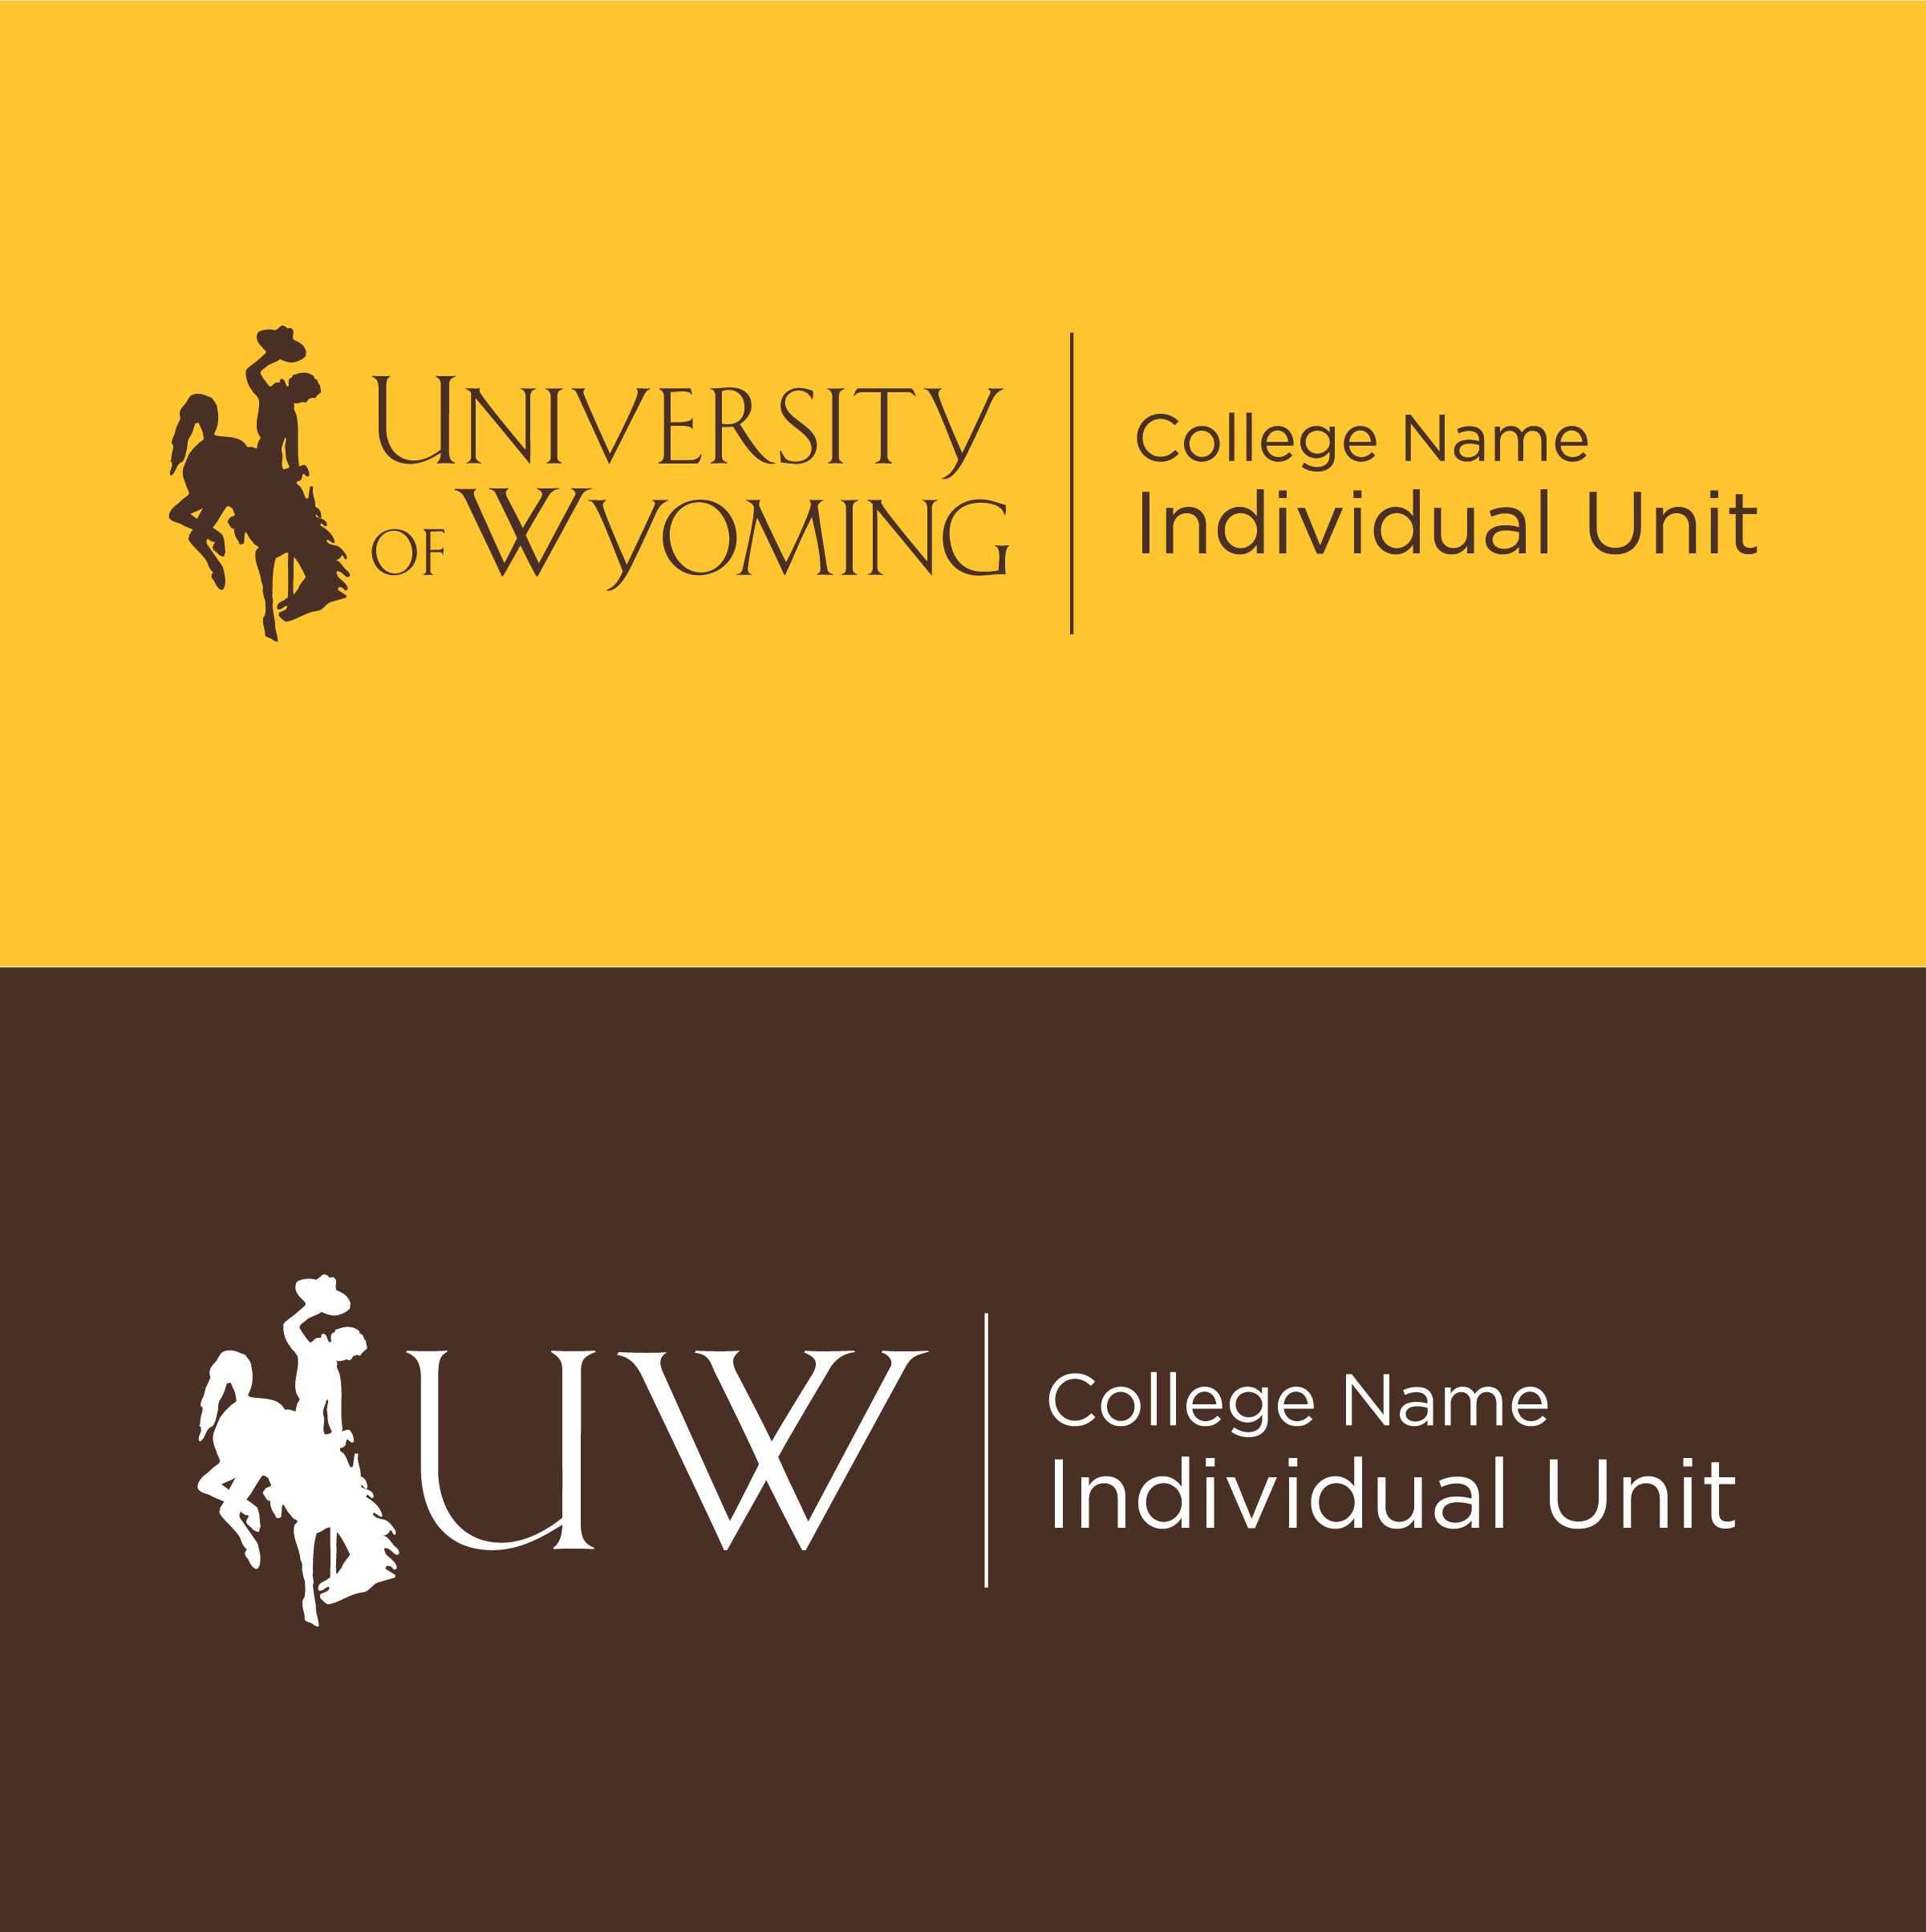 University of Wyoming logo with college name and unit, long form